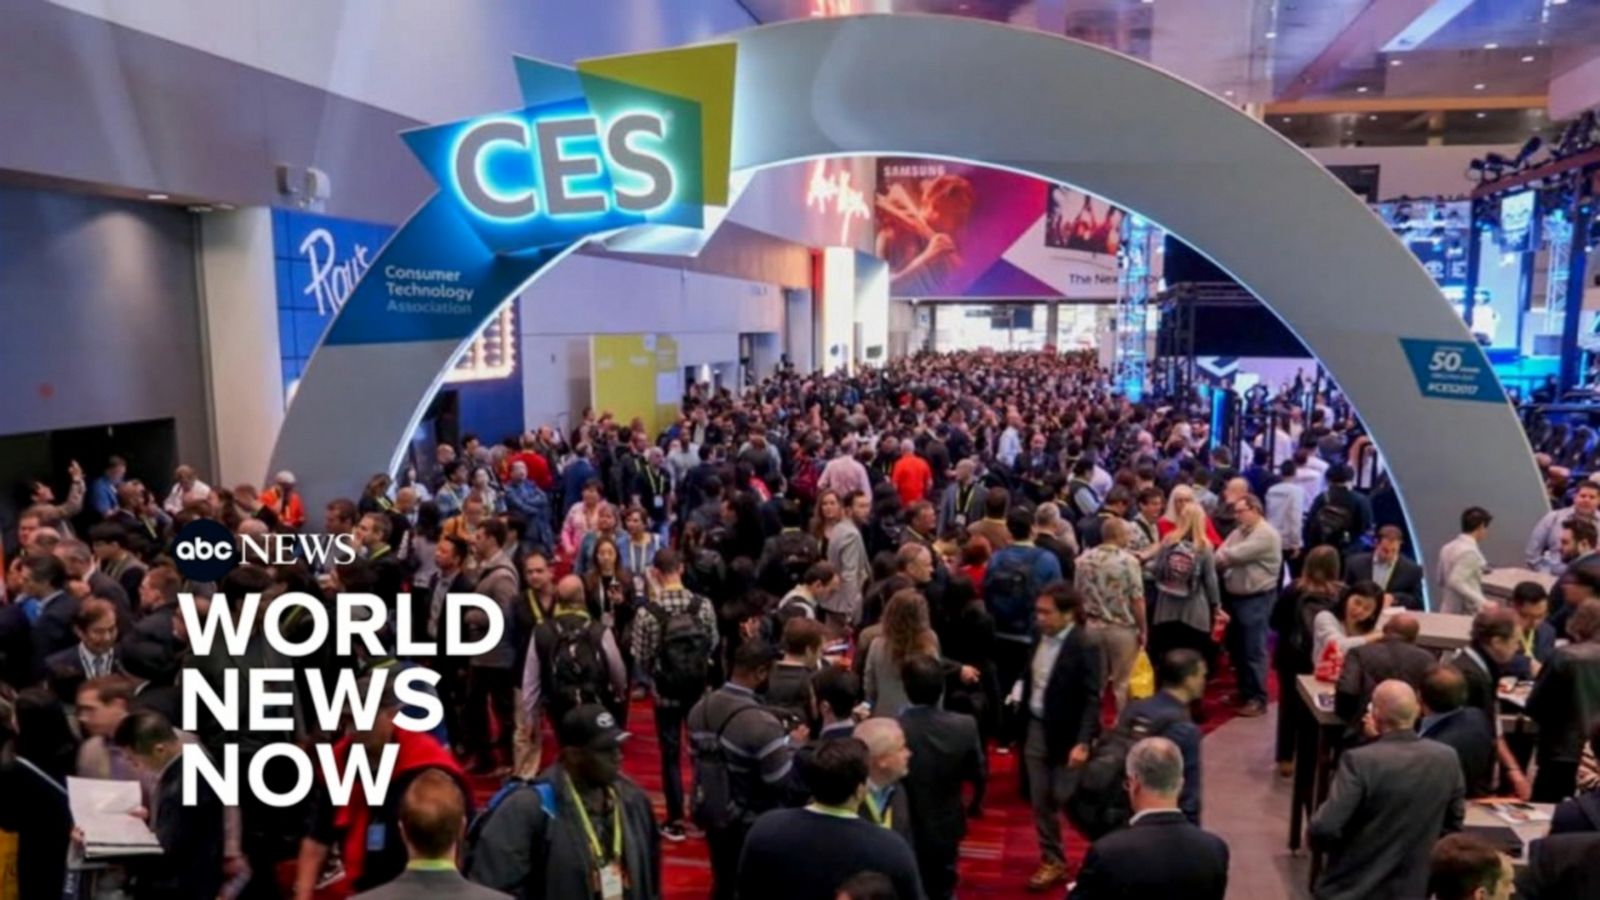 Offbeat gadgets from CES 2023 - Good Morning America